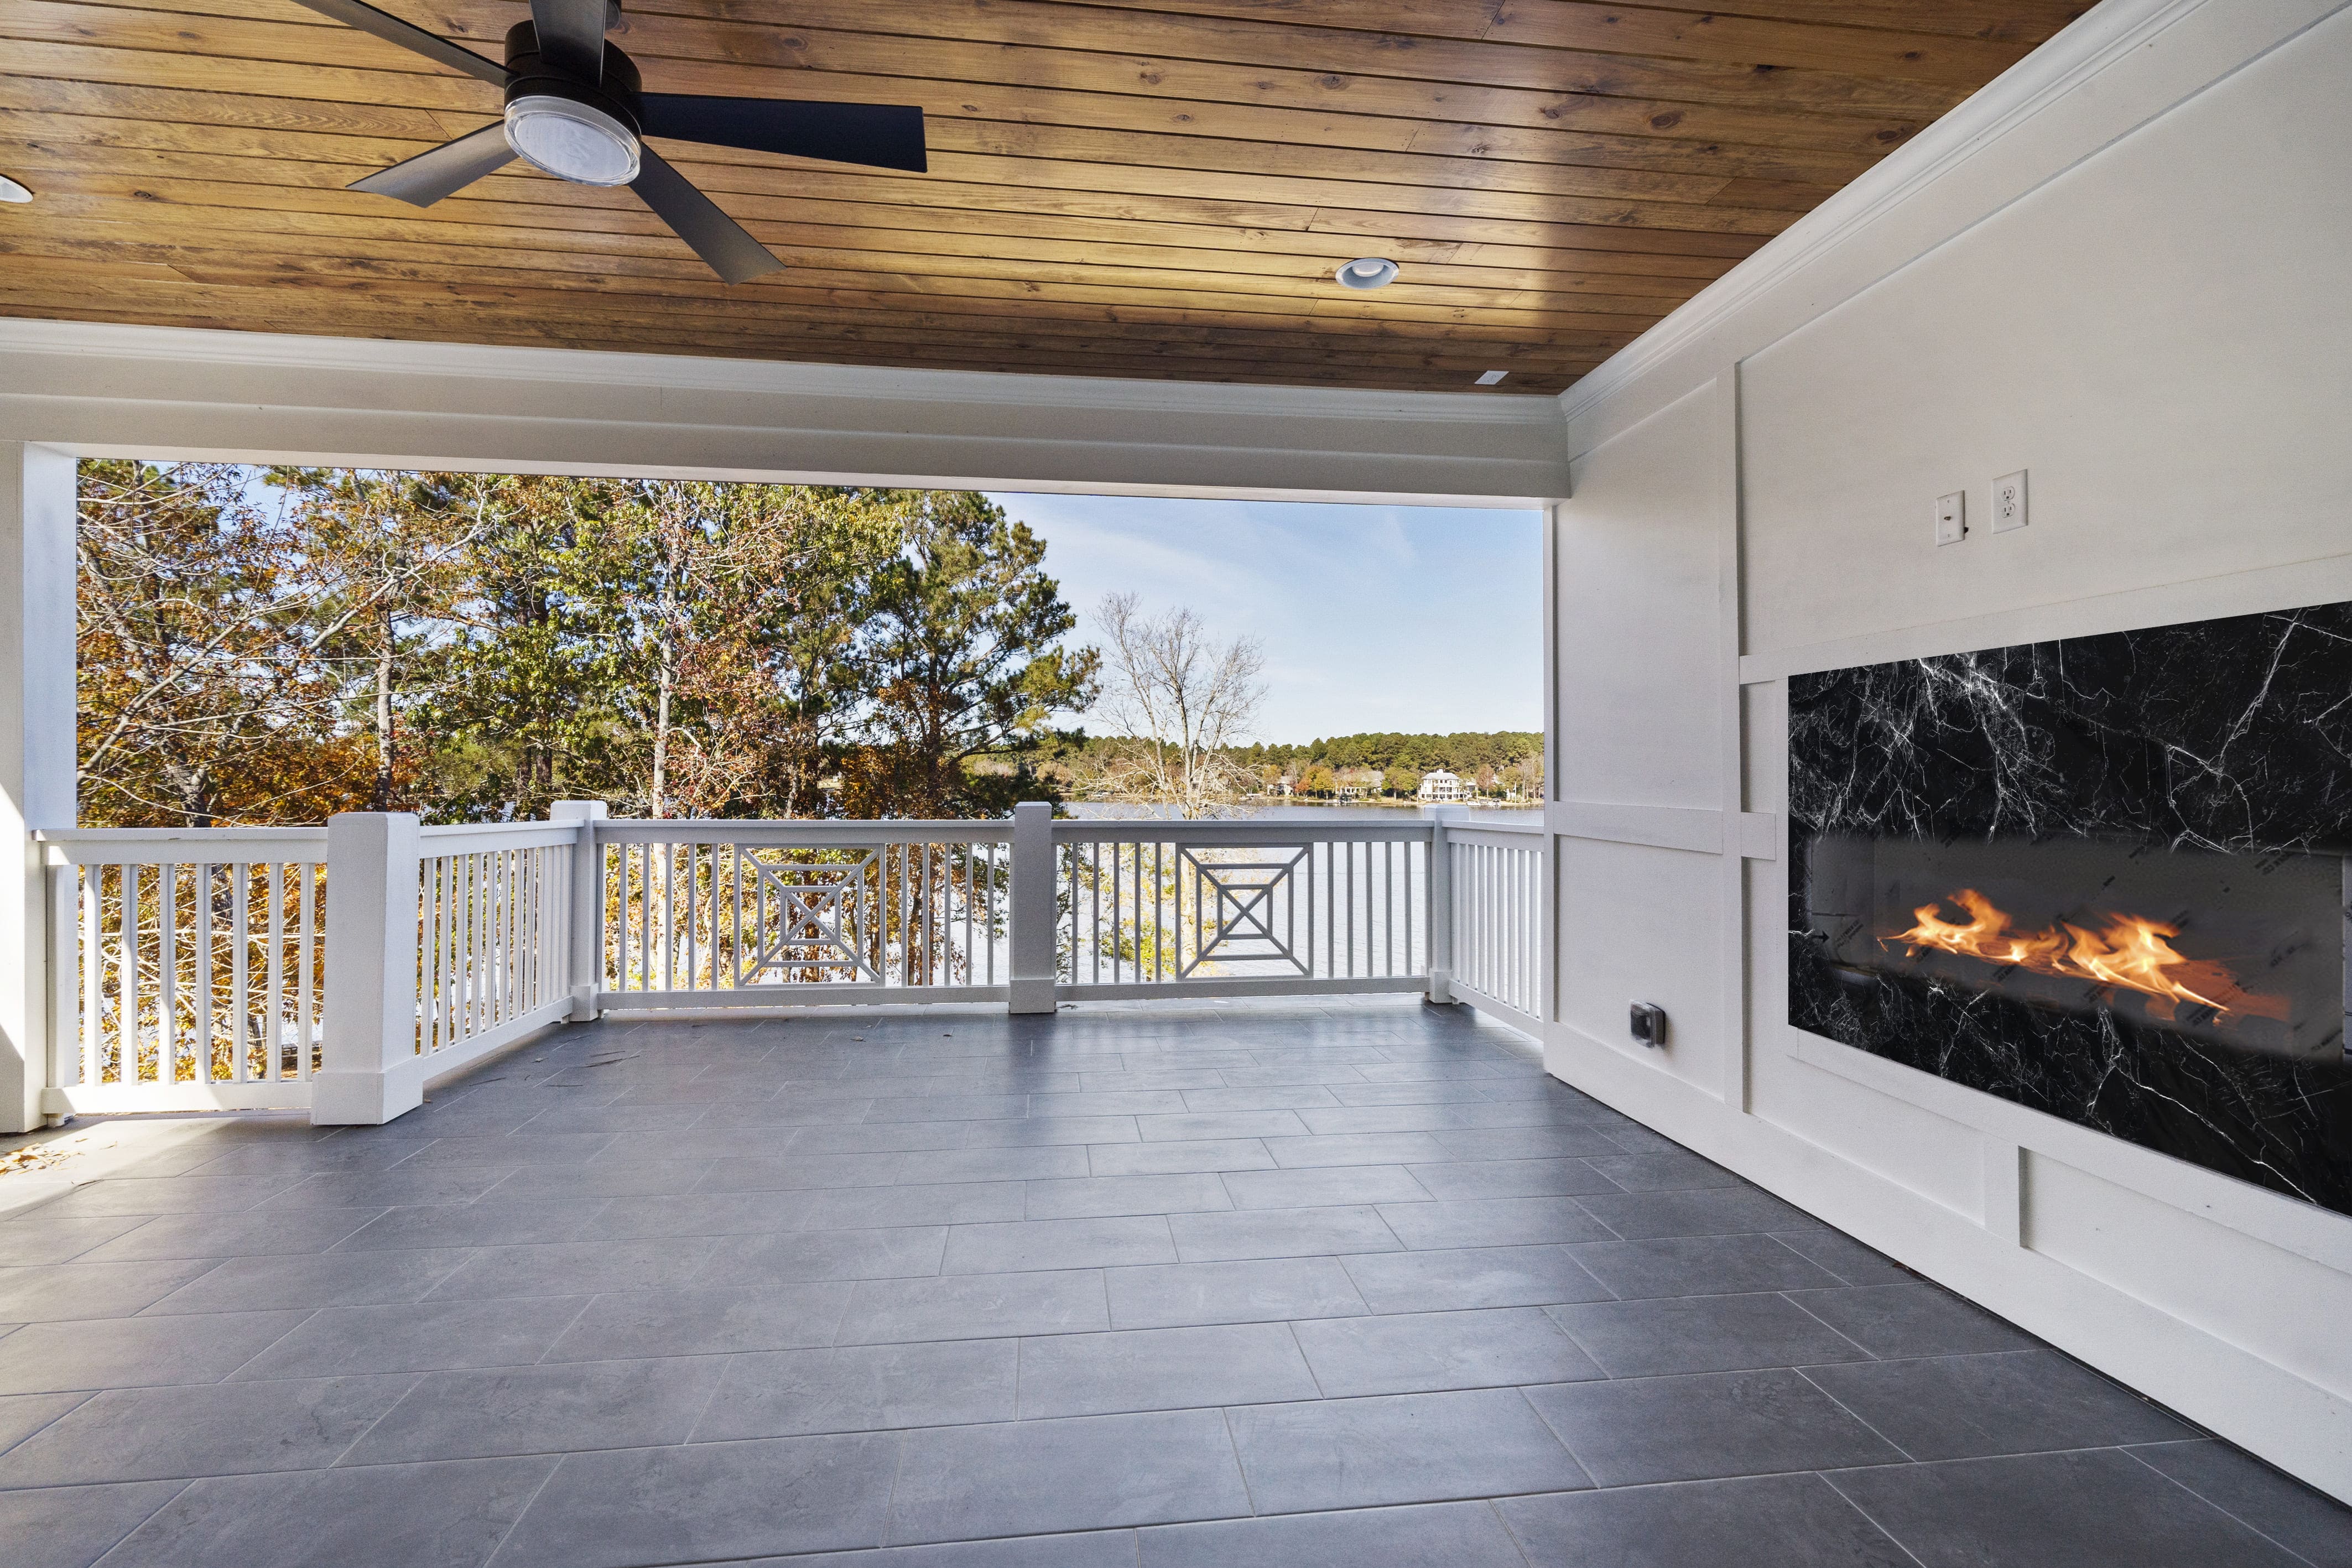 Stone Floored Back Porch with White Fence and White Wall Equipped with a Built-In Black Marble Fireplace